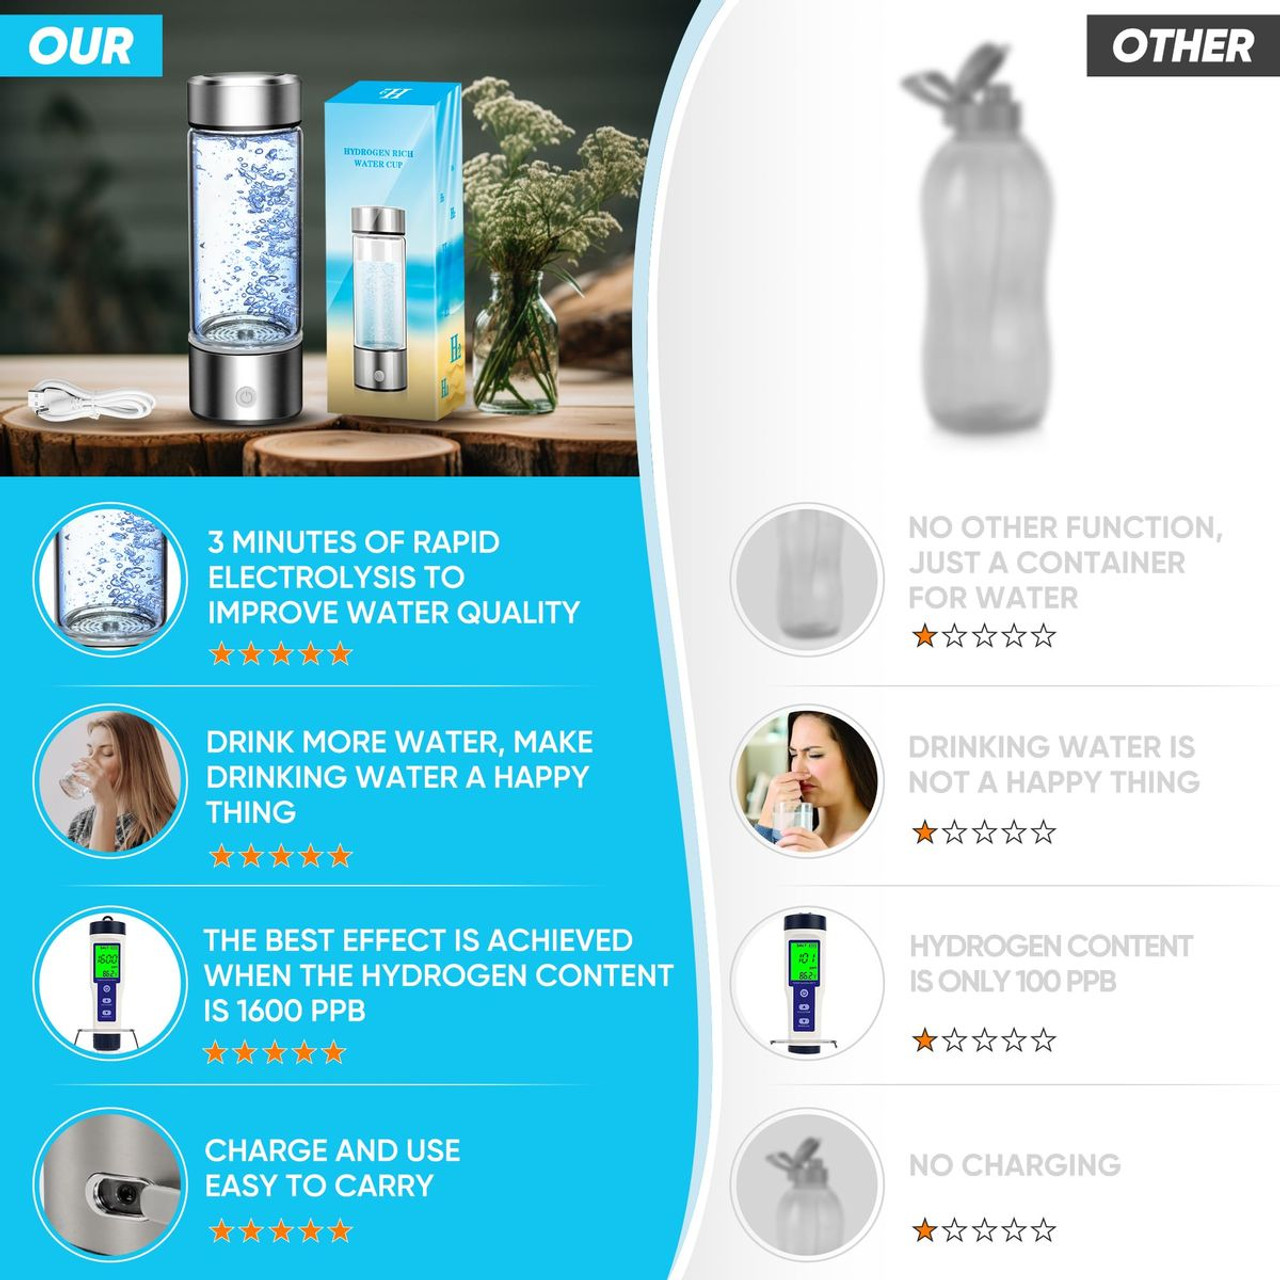 Hydrogen Water Bottle,Portable Hydrogen Water Bottle Generator,Ion Water Bottle Improve Water Quality in 3 Minutes,Water Ionizer Machine Suitable for Home,Office,Travel and Daily Drinking (Silver) product image